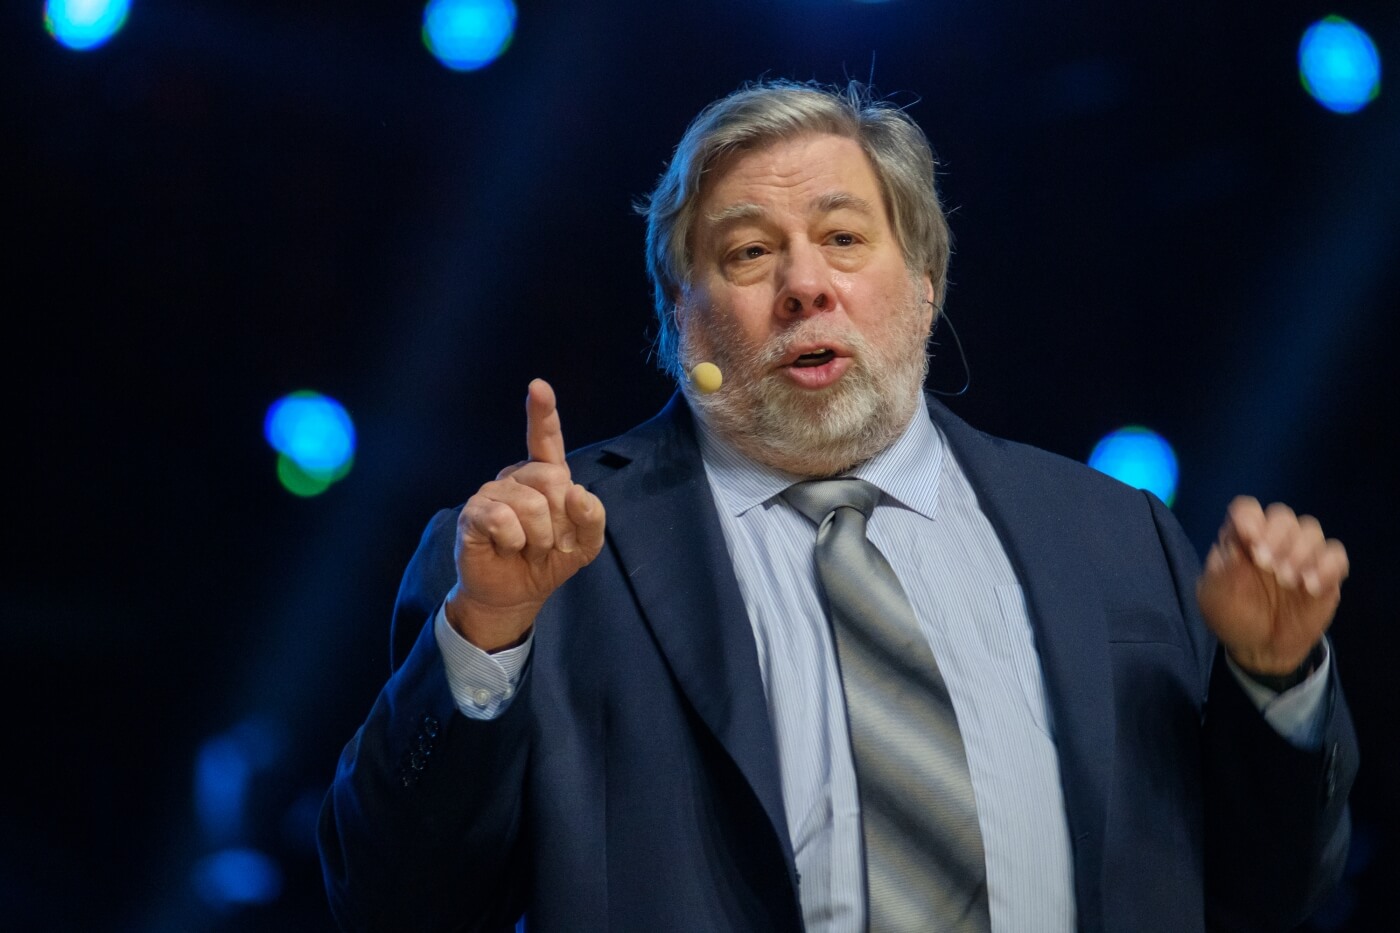 Steve Wozniak claims he might be patient zero for US coronavirus, but wife says she has sinus infection